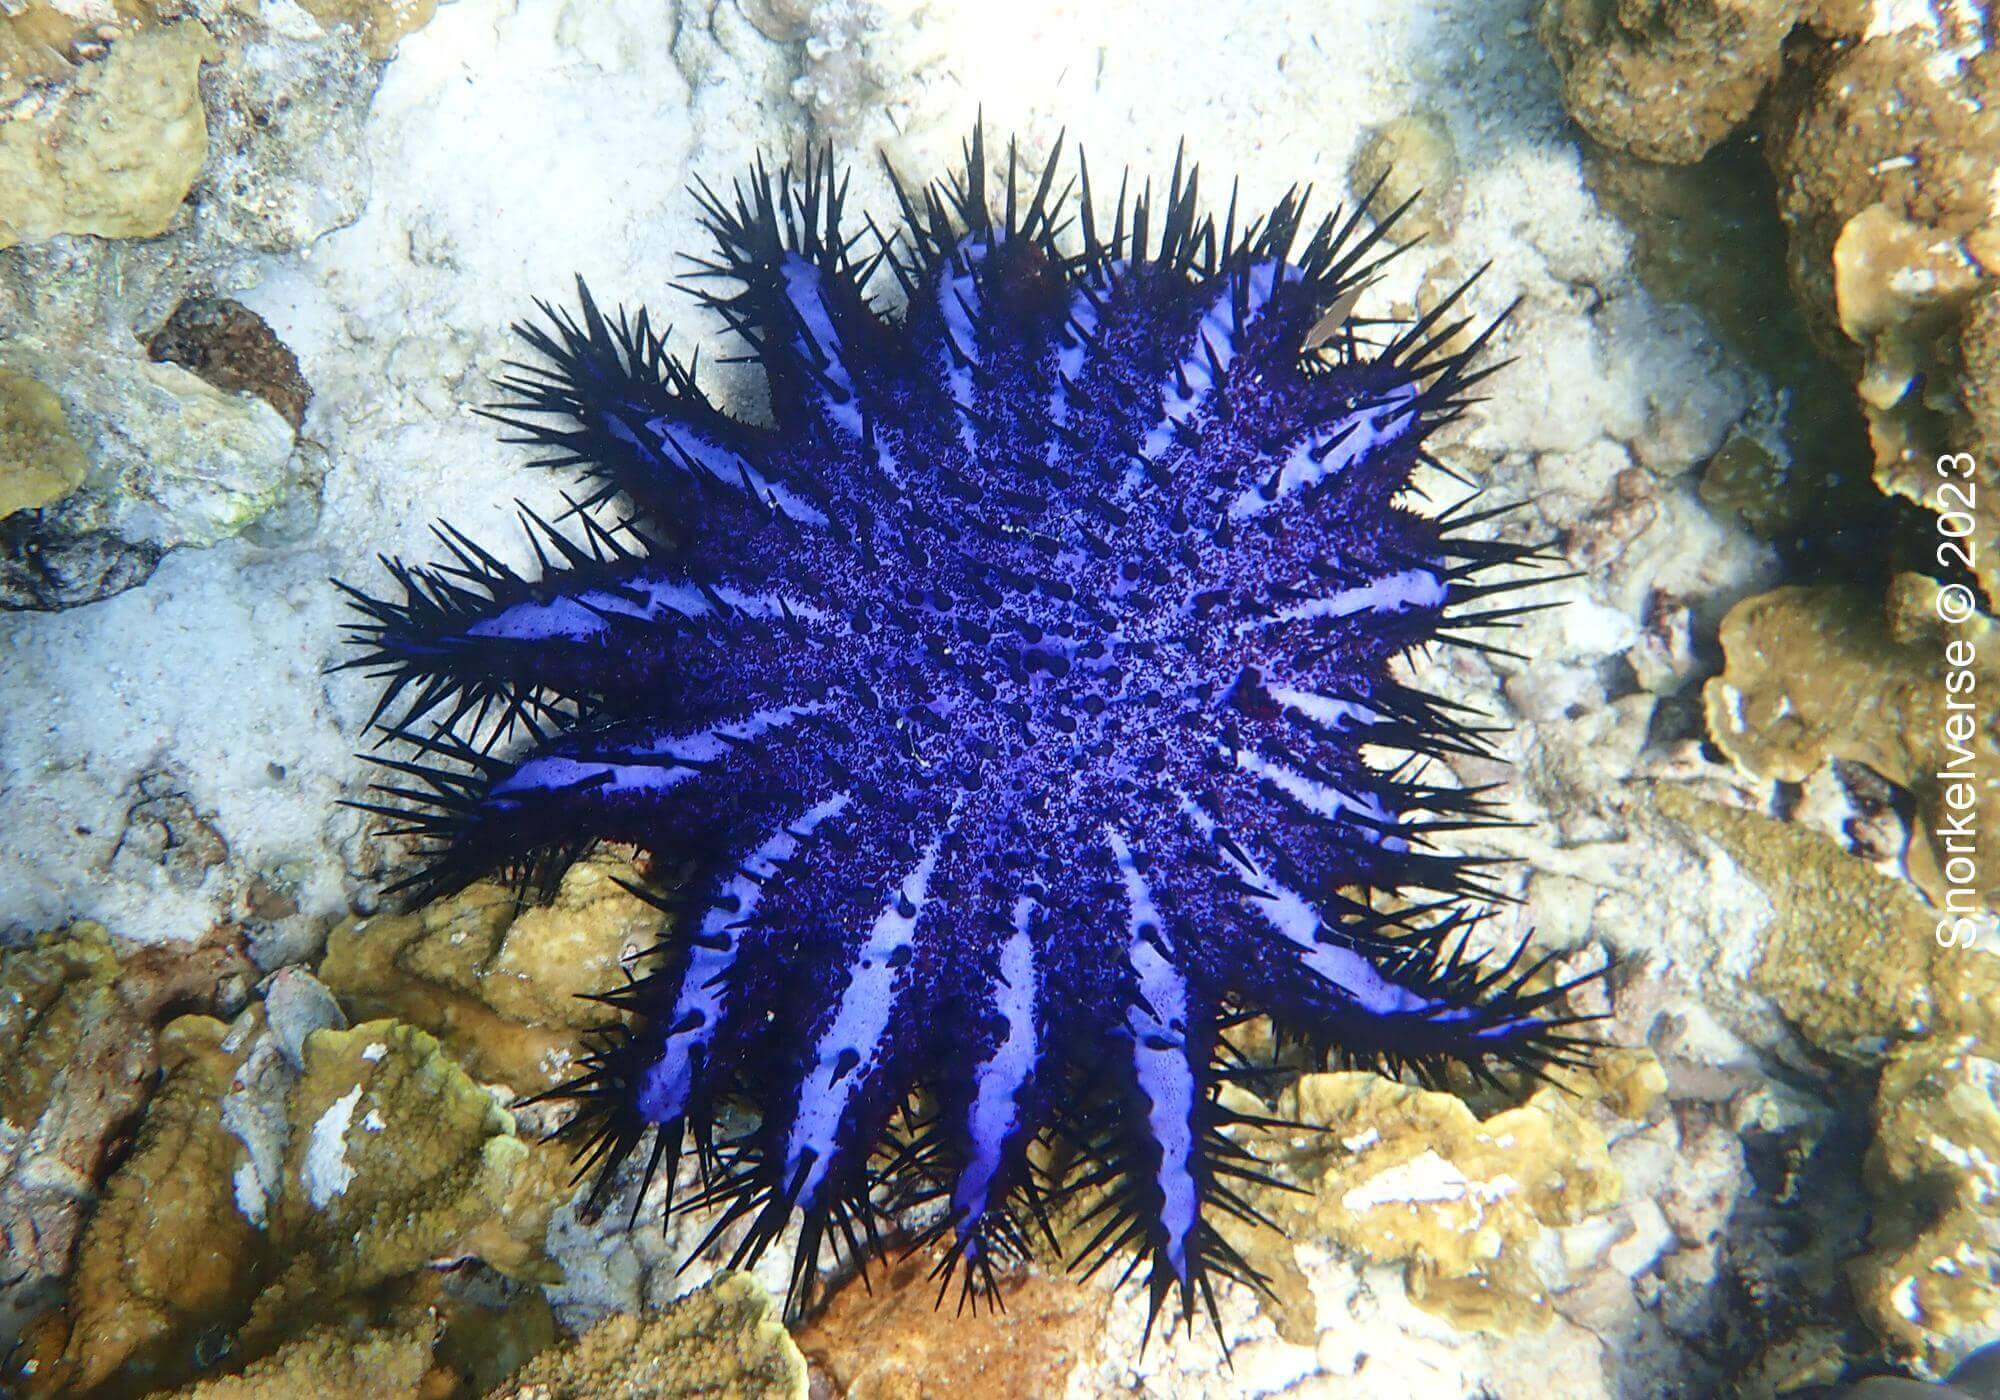 Crown-Of-Thorns Star Fish